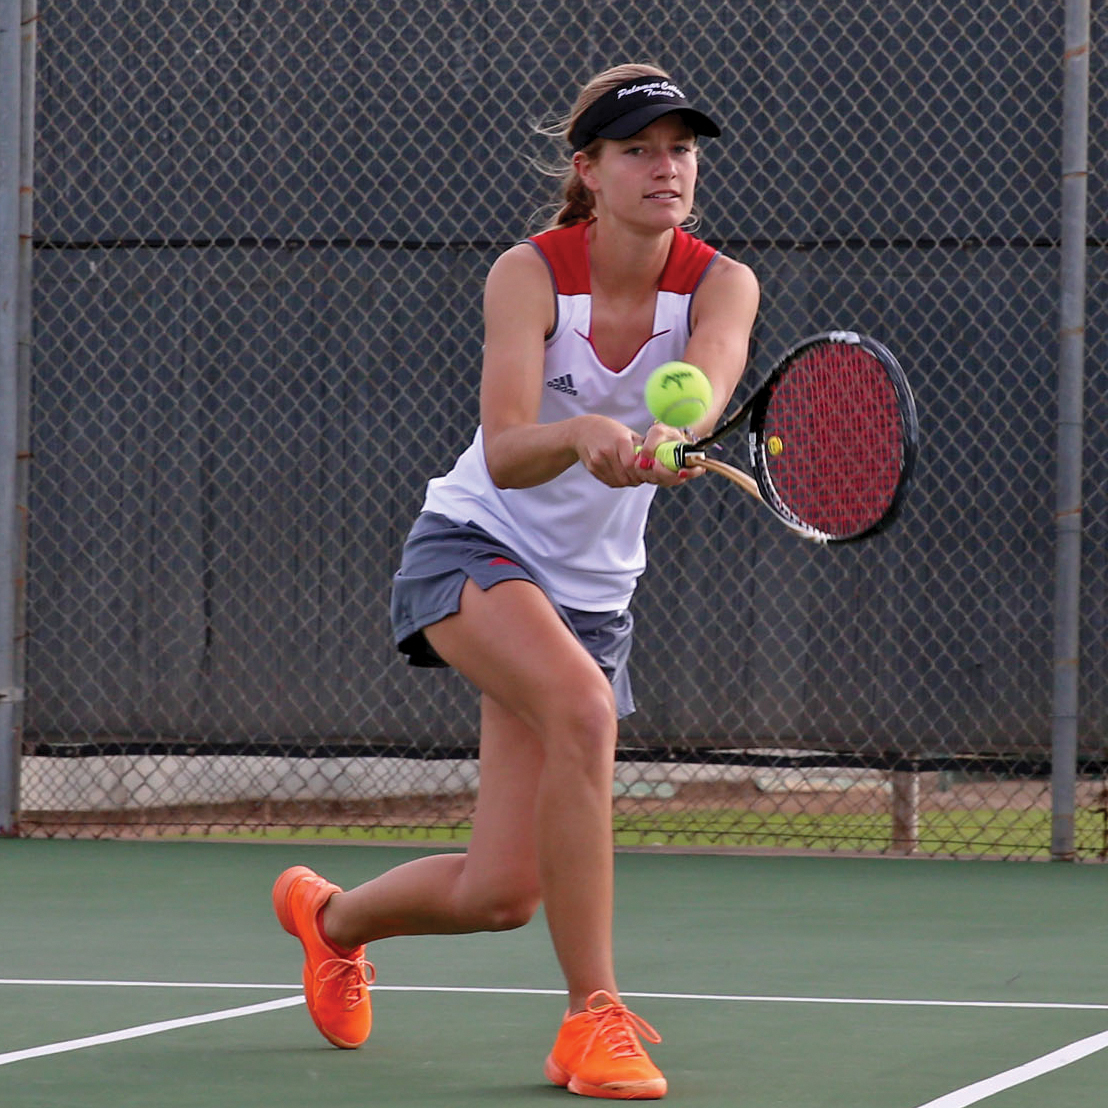 Palomar's Remy Littrel in match Feb 11, 2015 against Irvine Valley. (Photo Courtesy of Hugh Cox.)